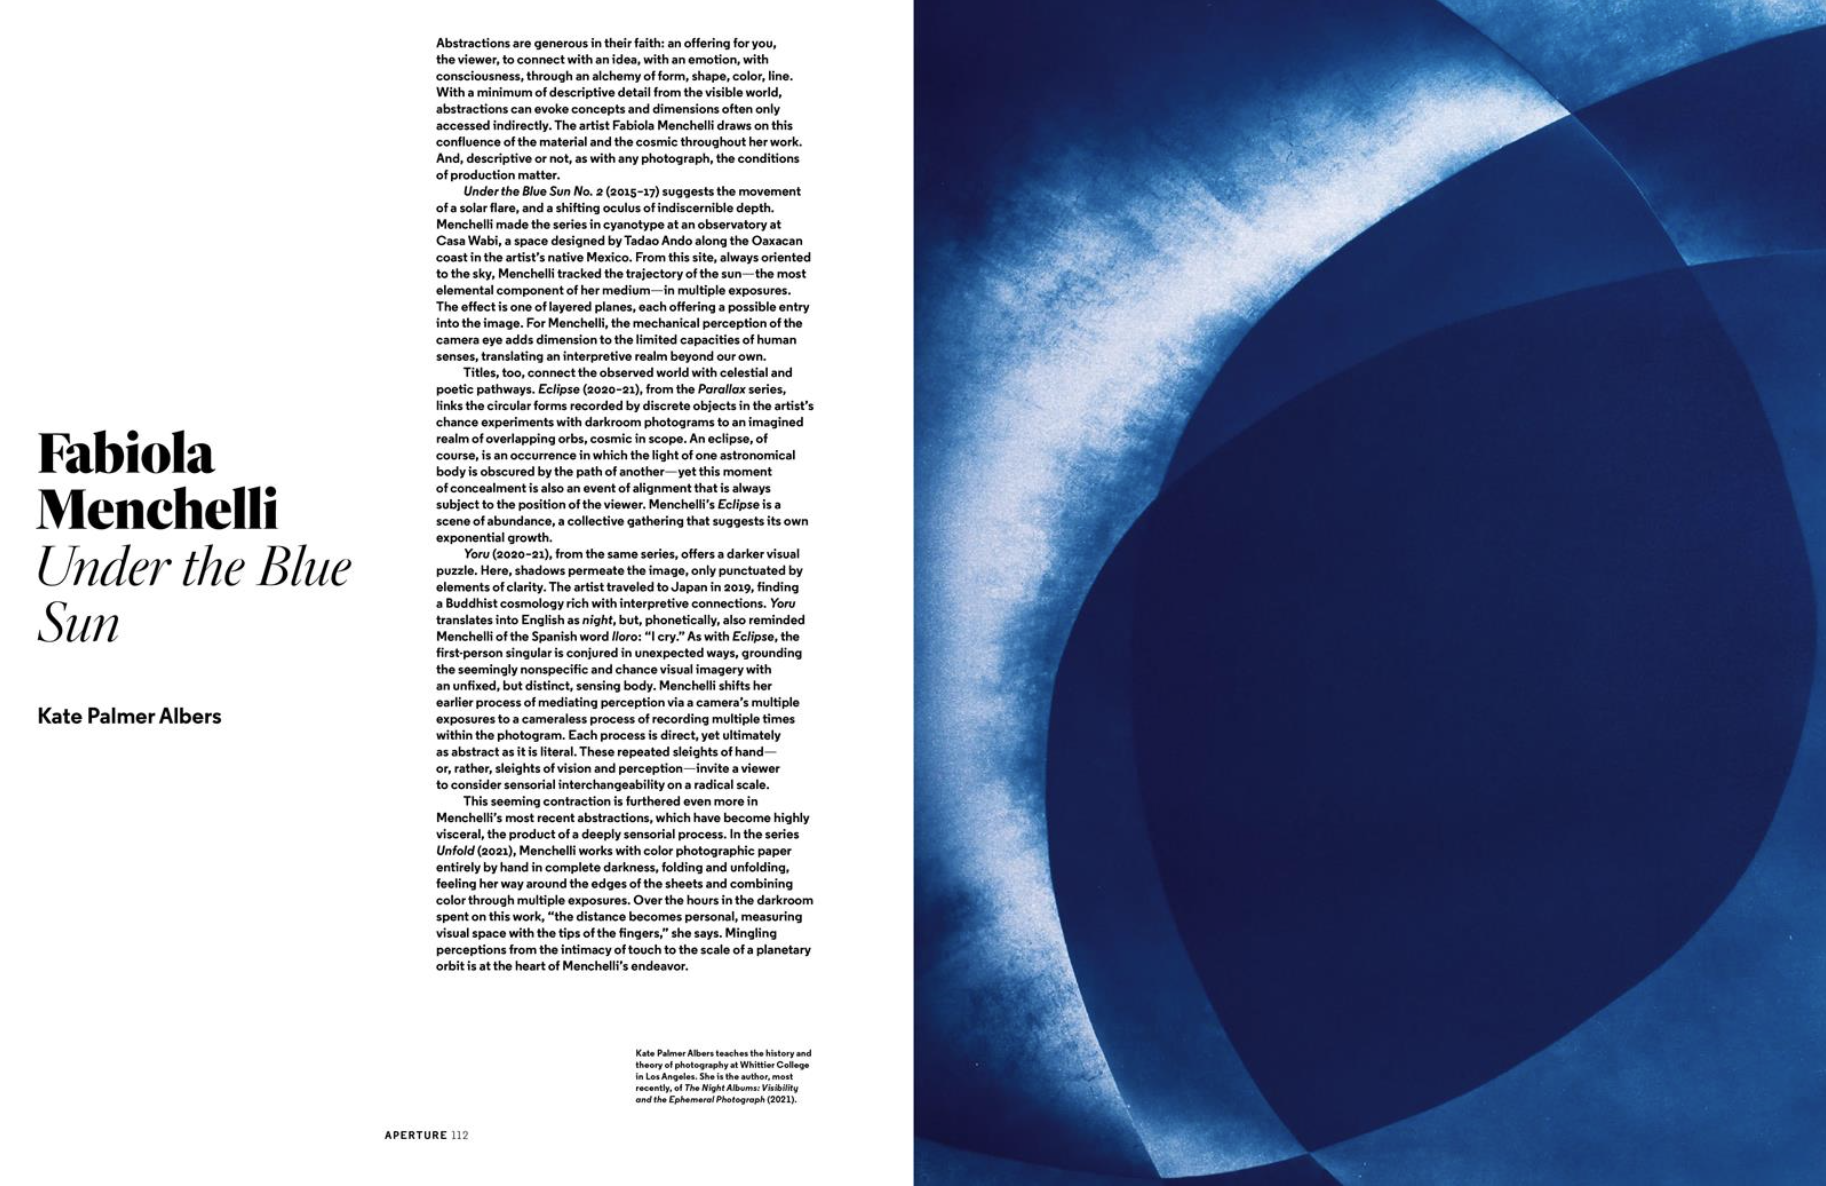 spread of first page of Aperture essay on Fabiola Menchelli